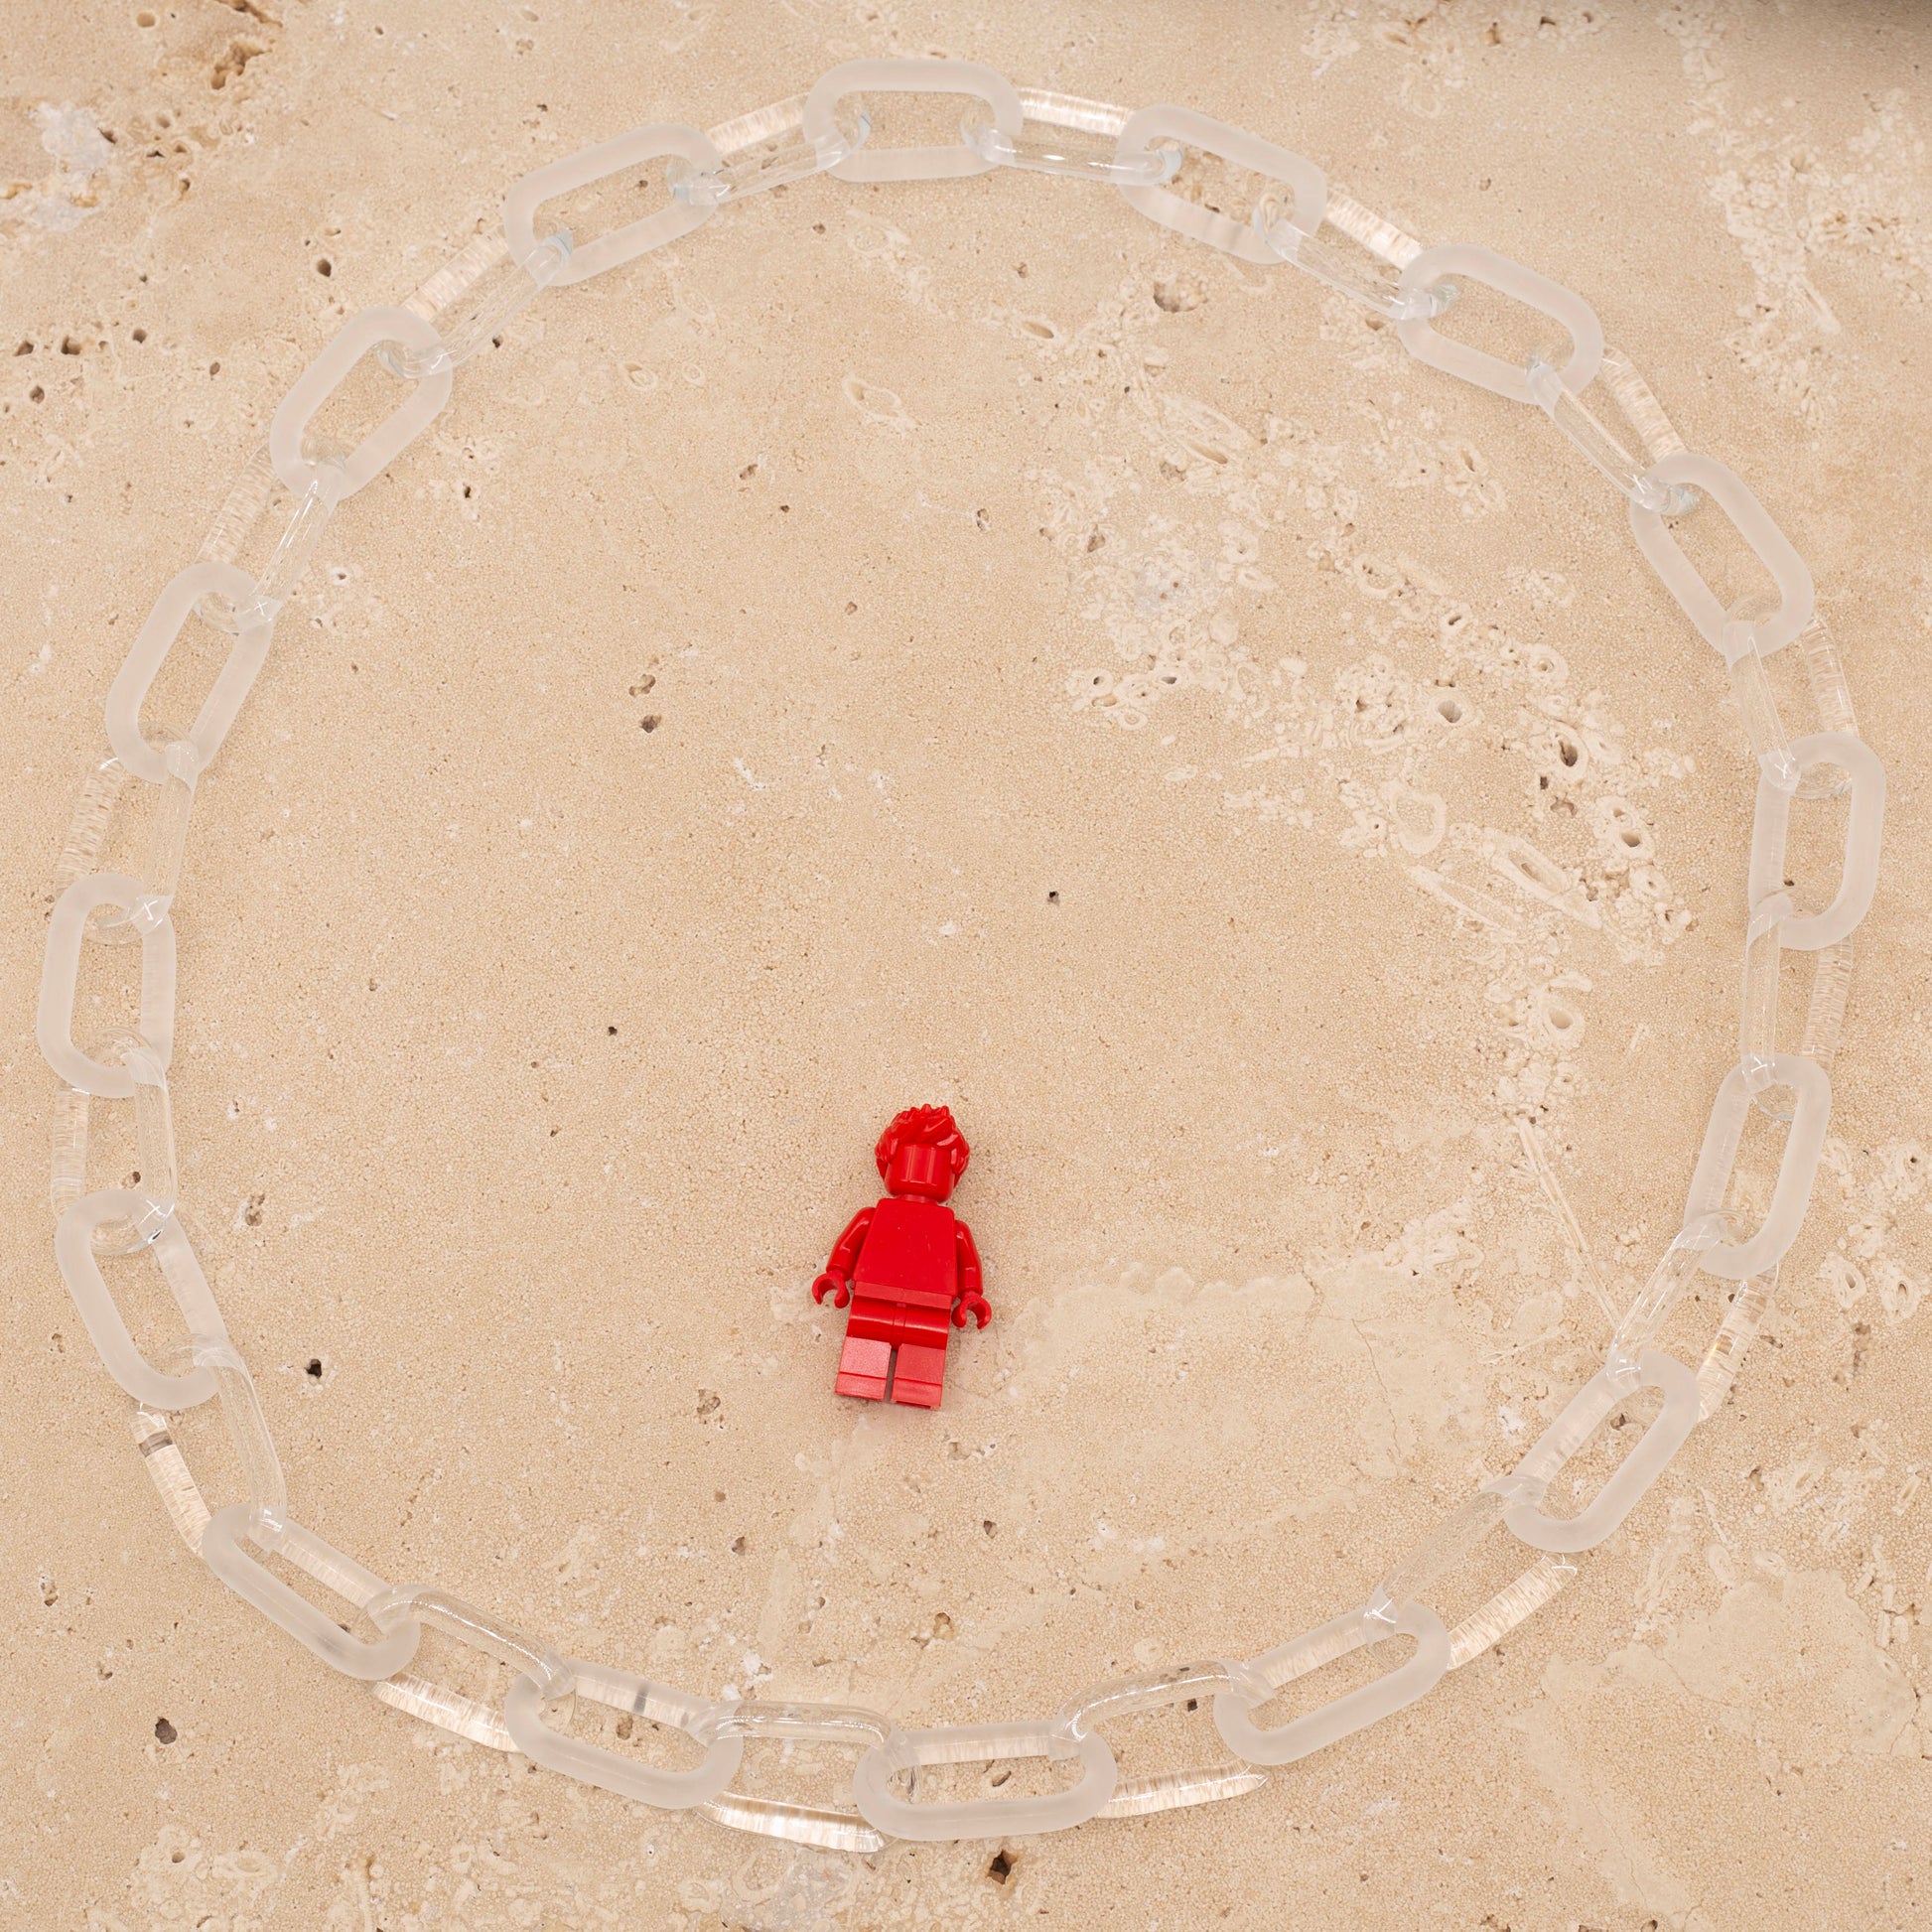 Overhead view, glass necklace made with bold links of alternating clear and frosted glass. Image includes Lego figure for scale.